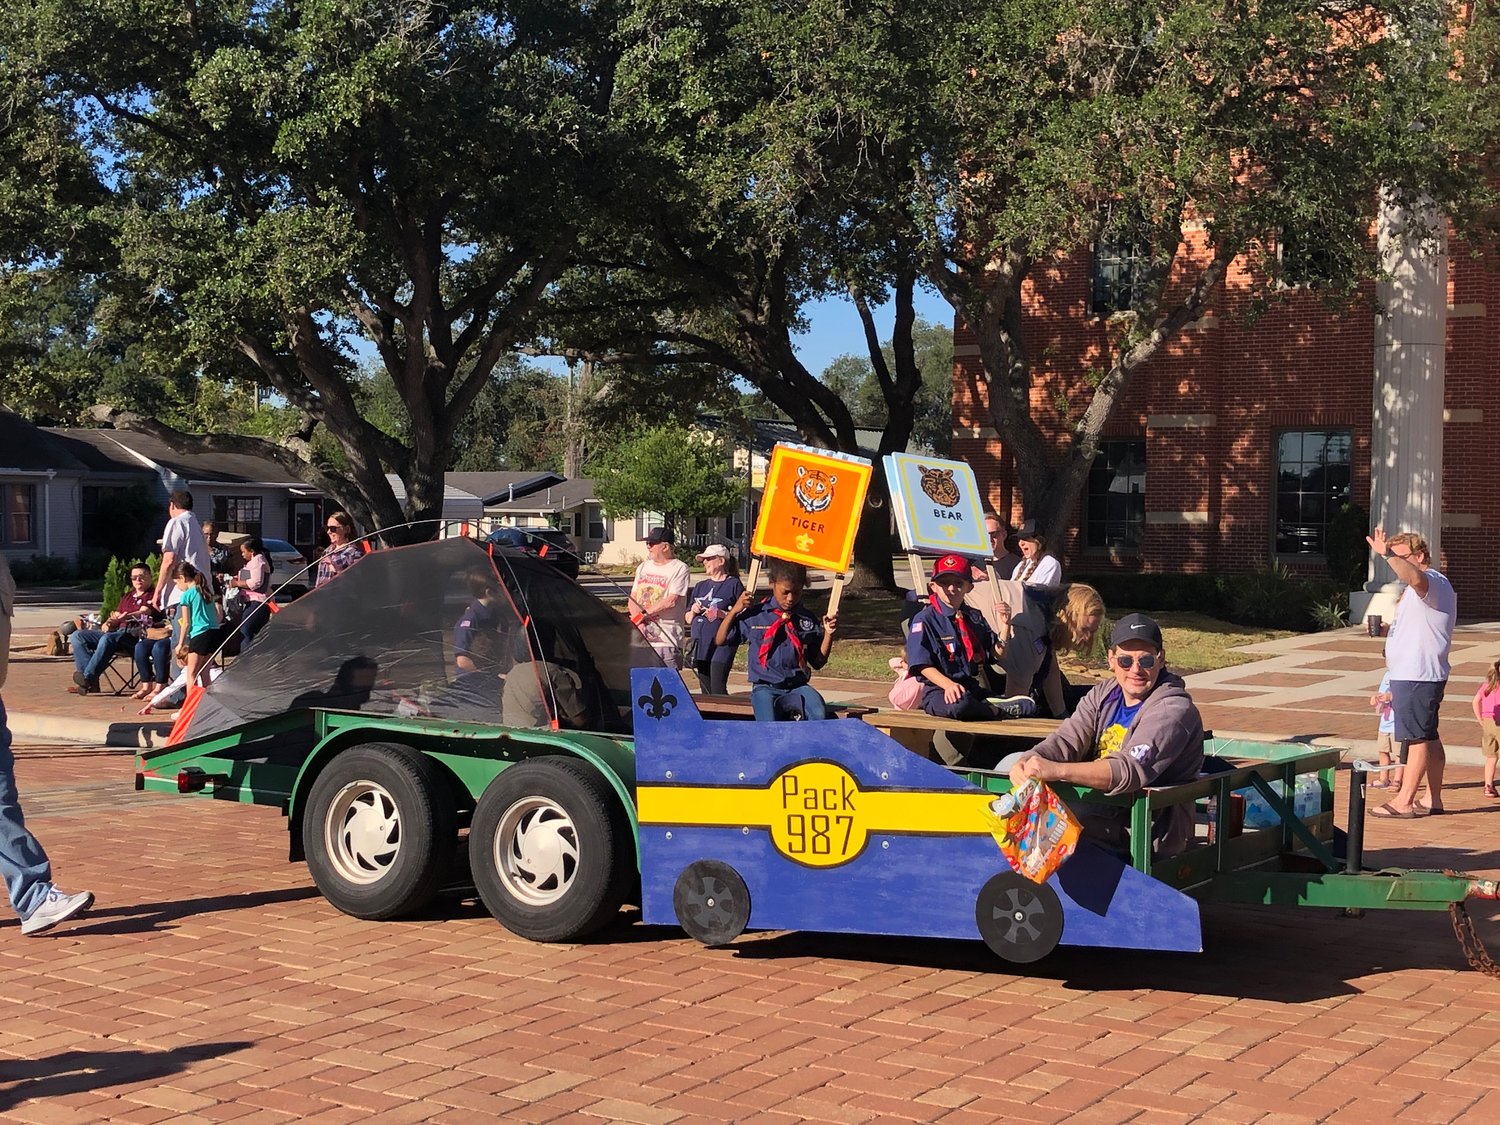 Cub Scout Pack 987 enjoy their ride in the parade.